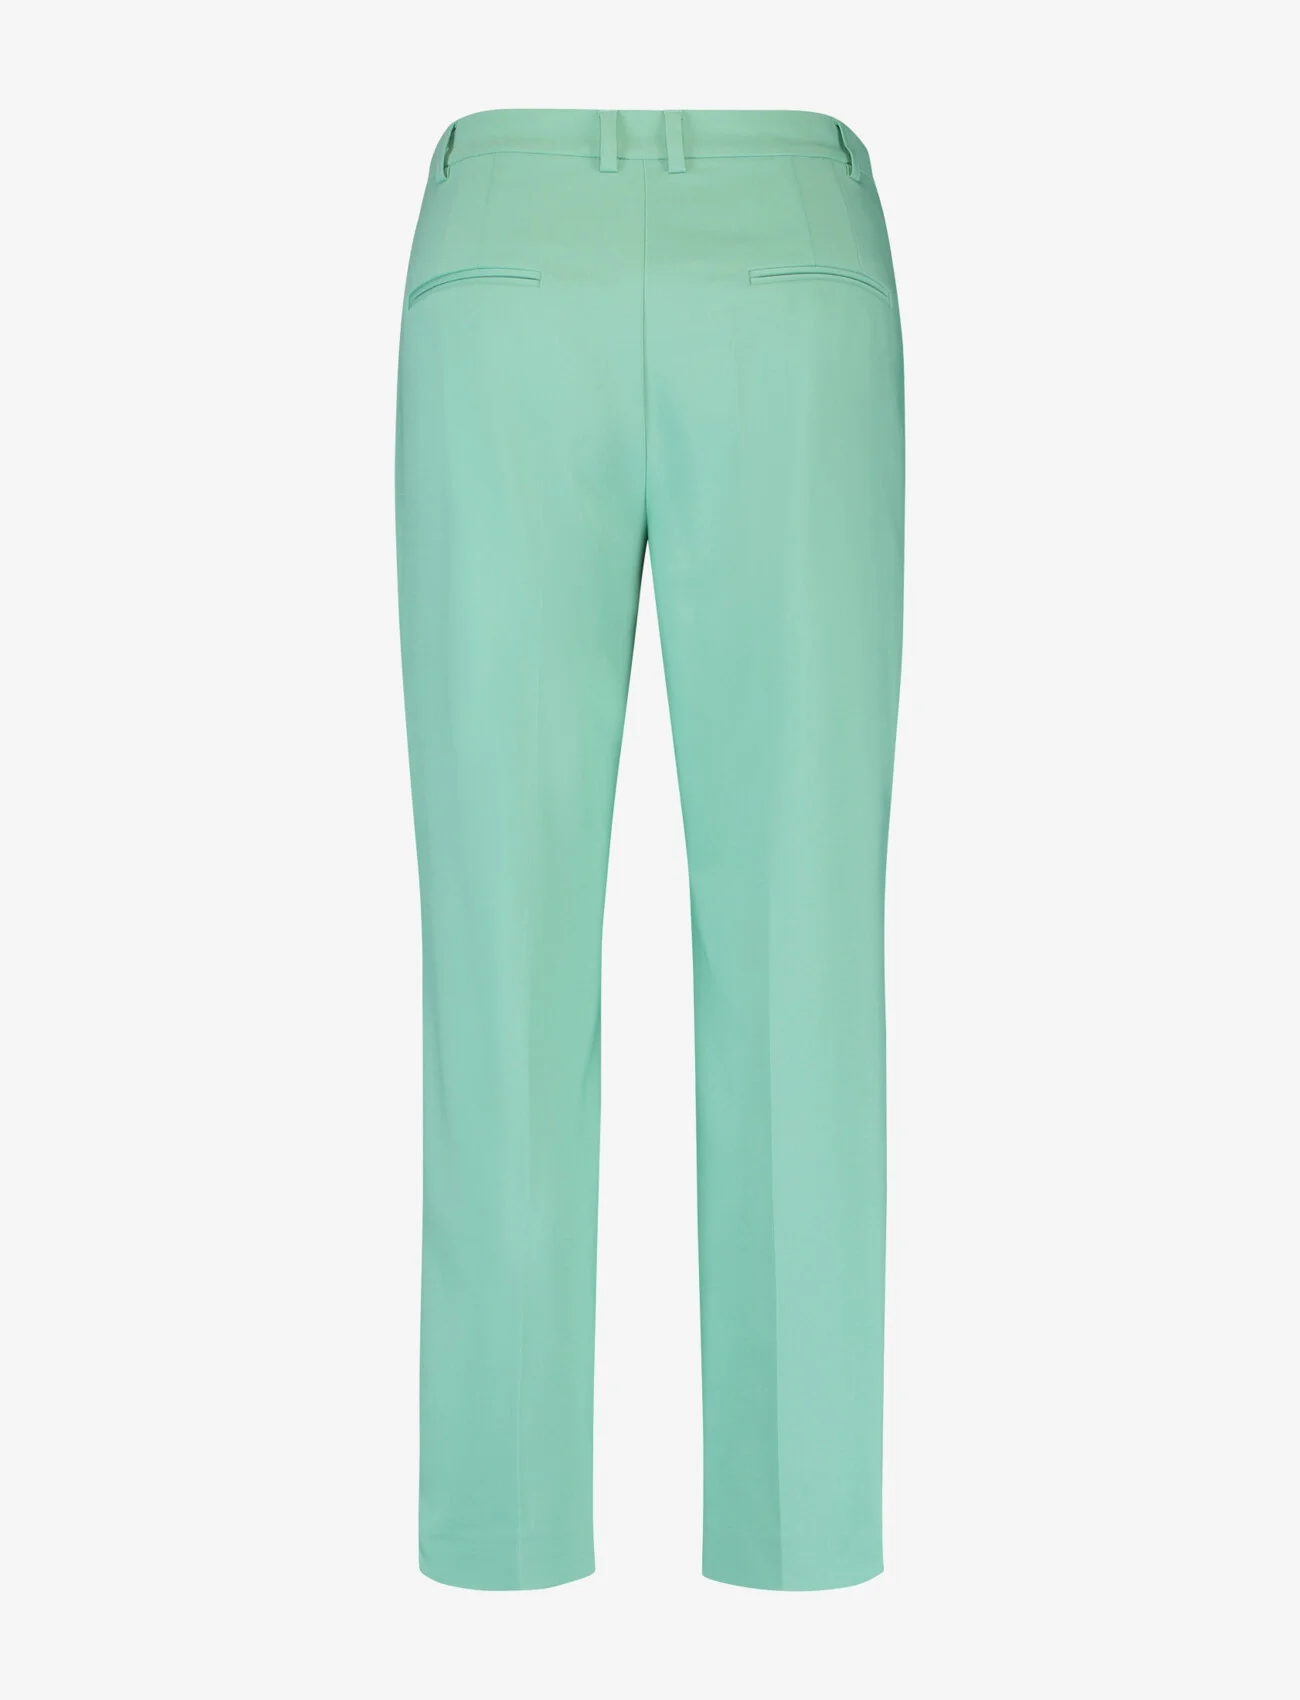 Gerry Weber - PANT LEISURE CROPPED - chinos - dusty jade green - 1